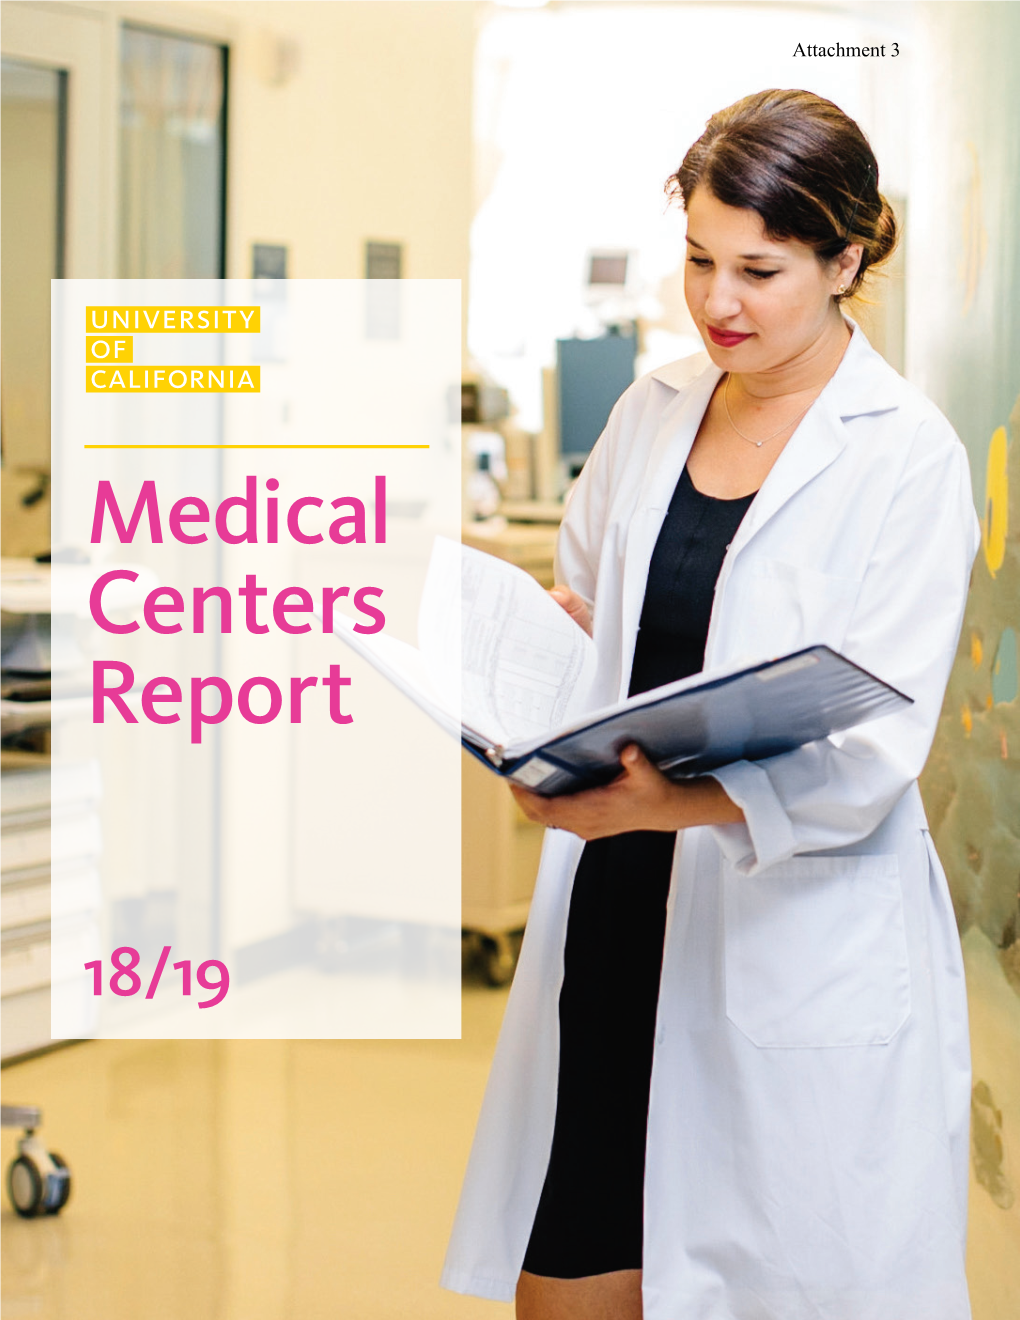 Attachment 3: University of California Medical Centers Financial Report